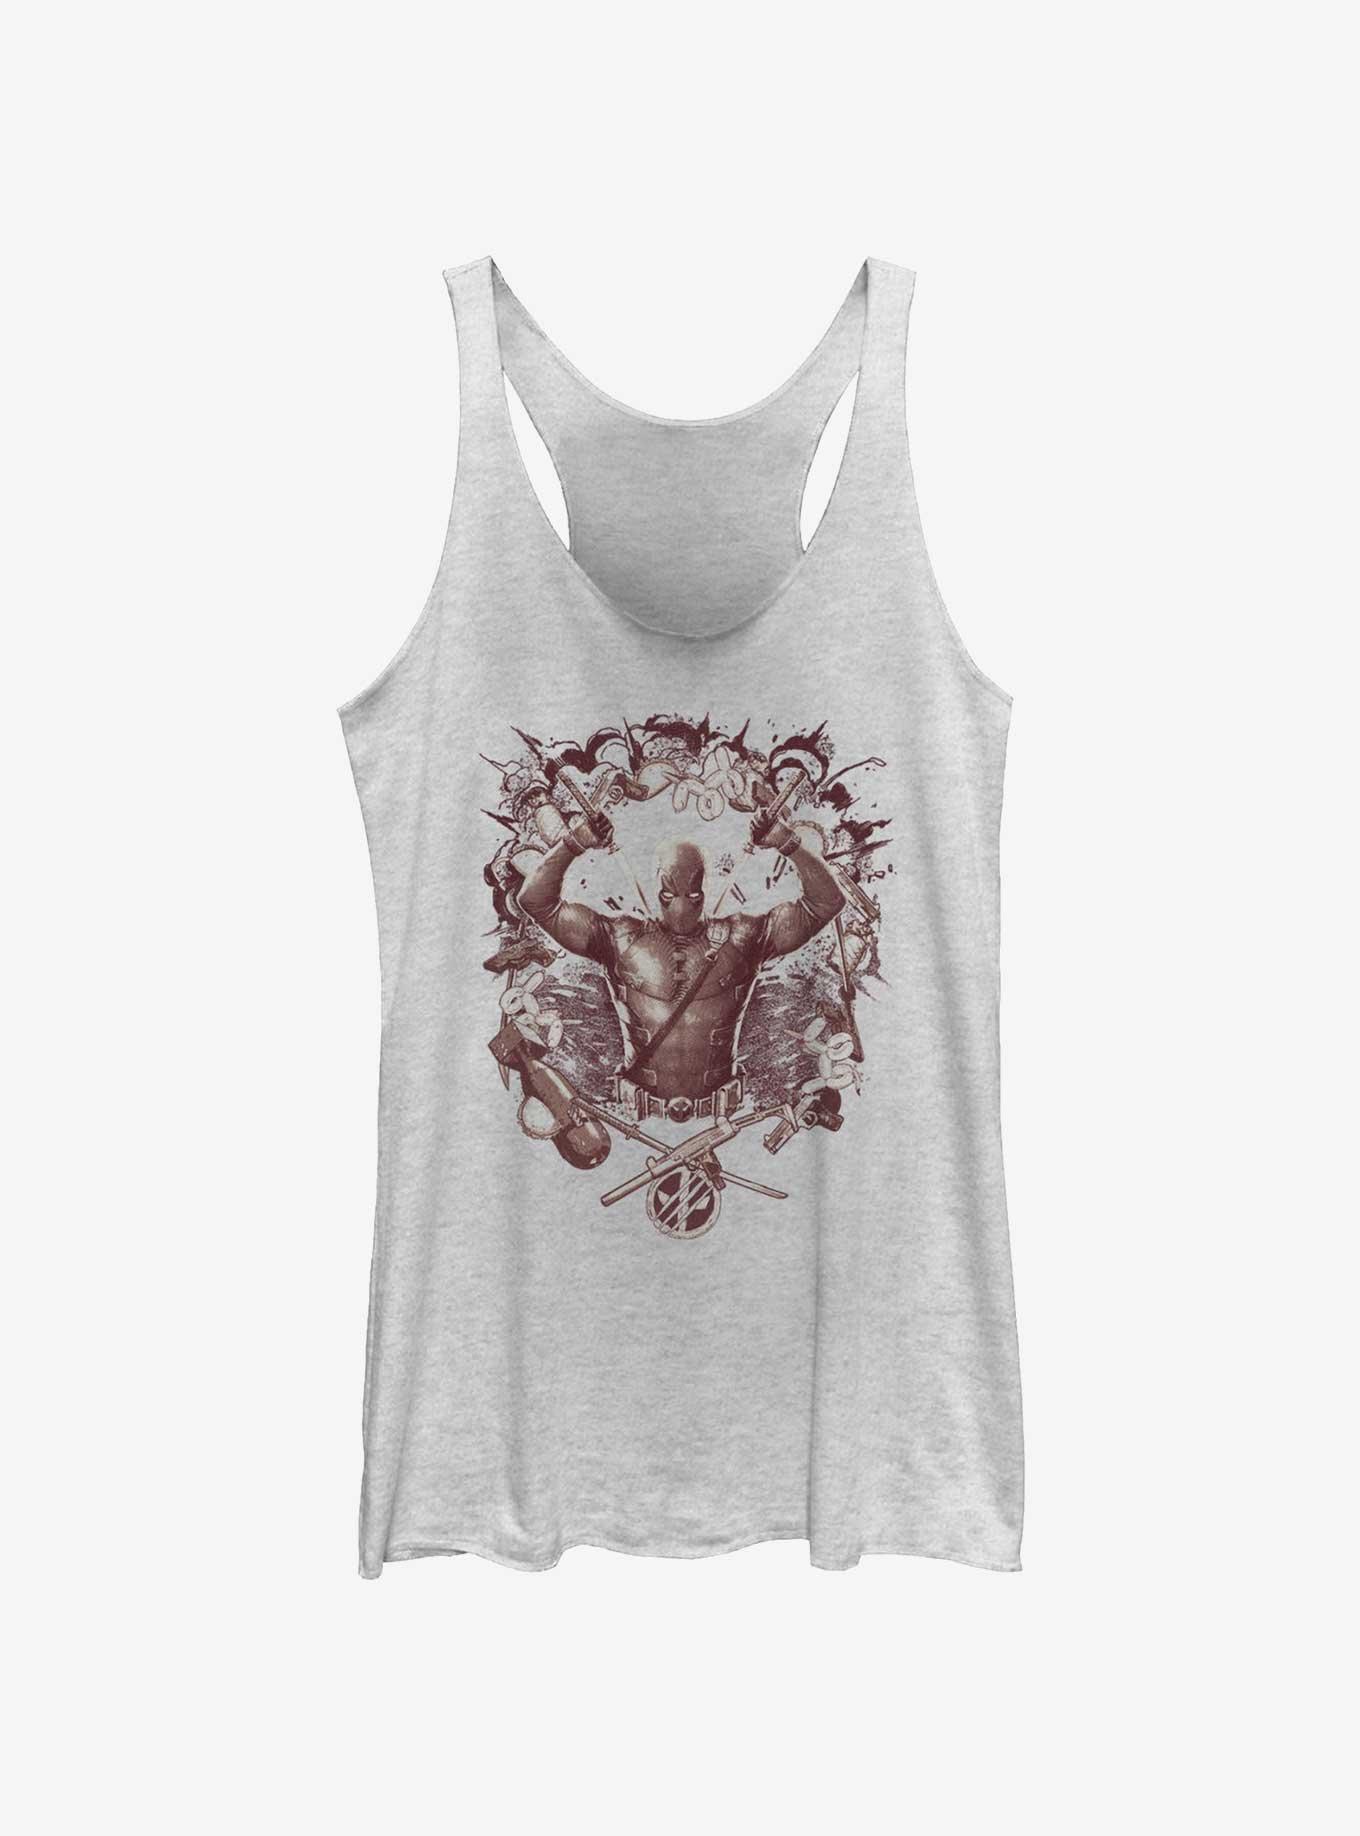 Marvel Deadpool & Wolverine Weapons Explosion Womens Tank Top, WHITE HTR, hi-res